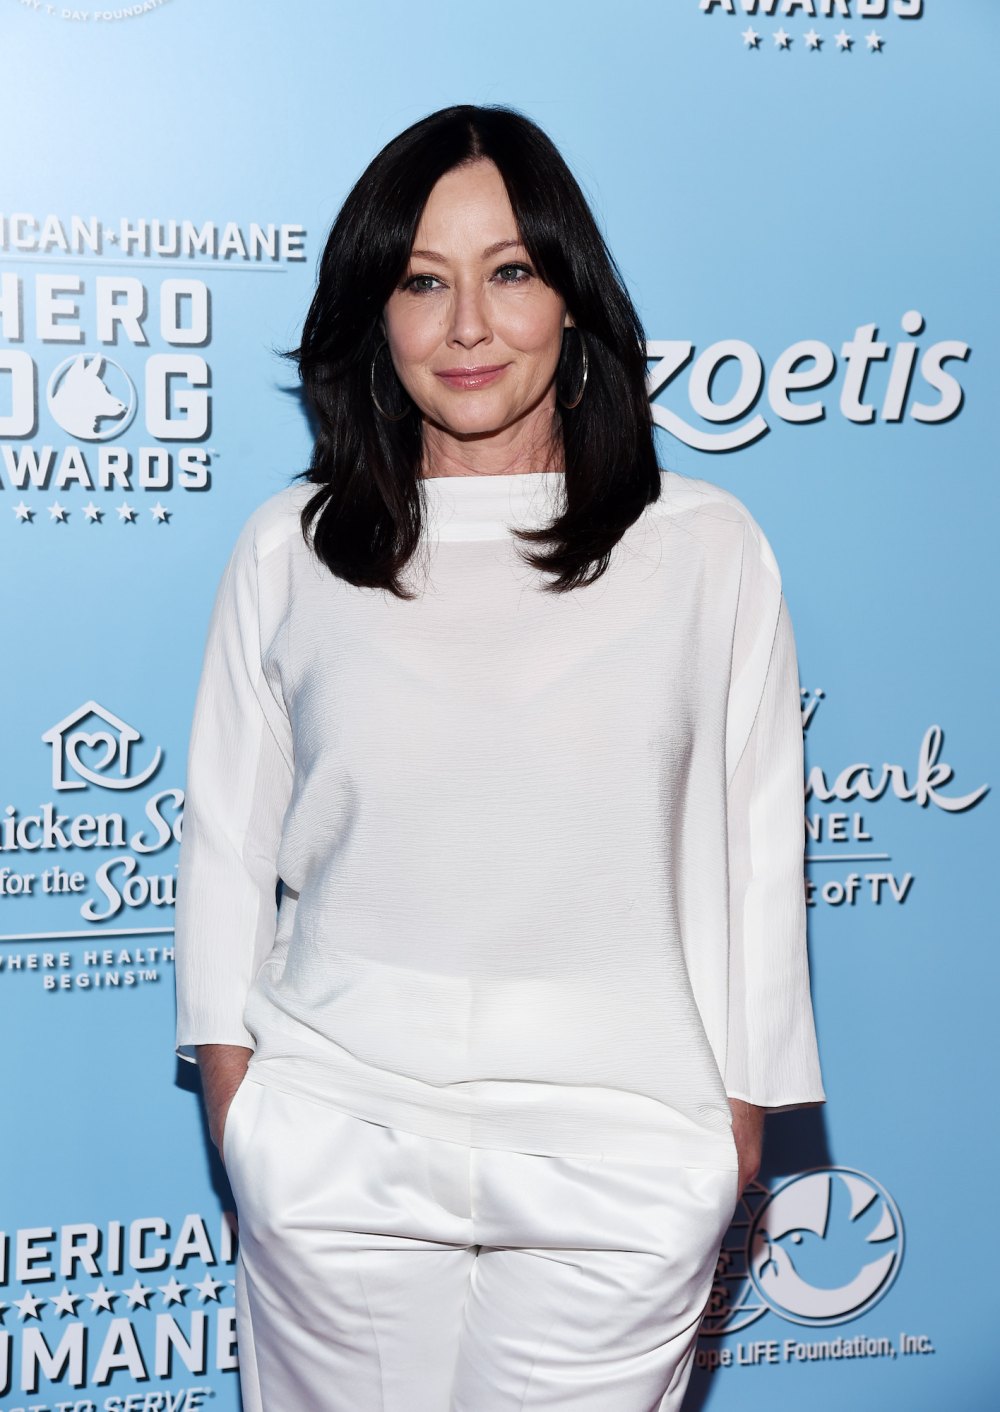 Shannen Doherty Explains How Cancer Decreased Her Libido Sex Doesn t Feel as Good